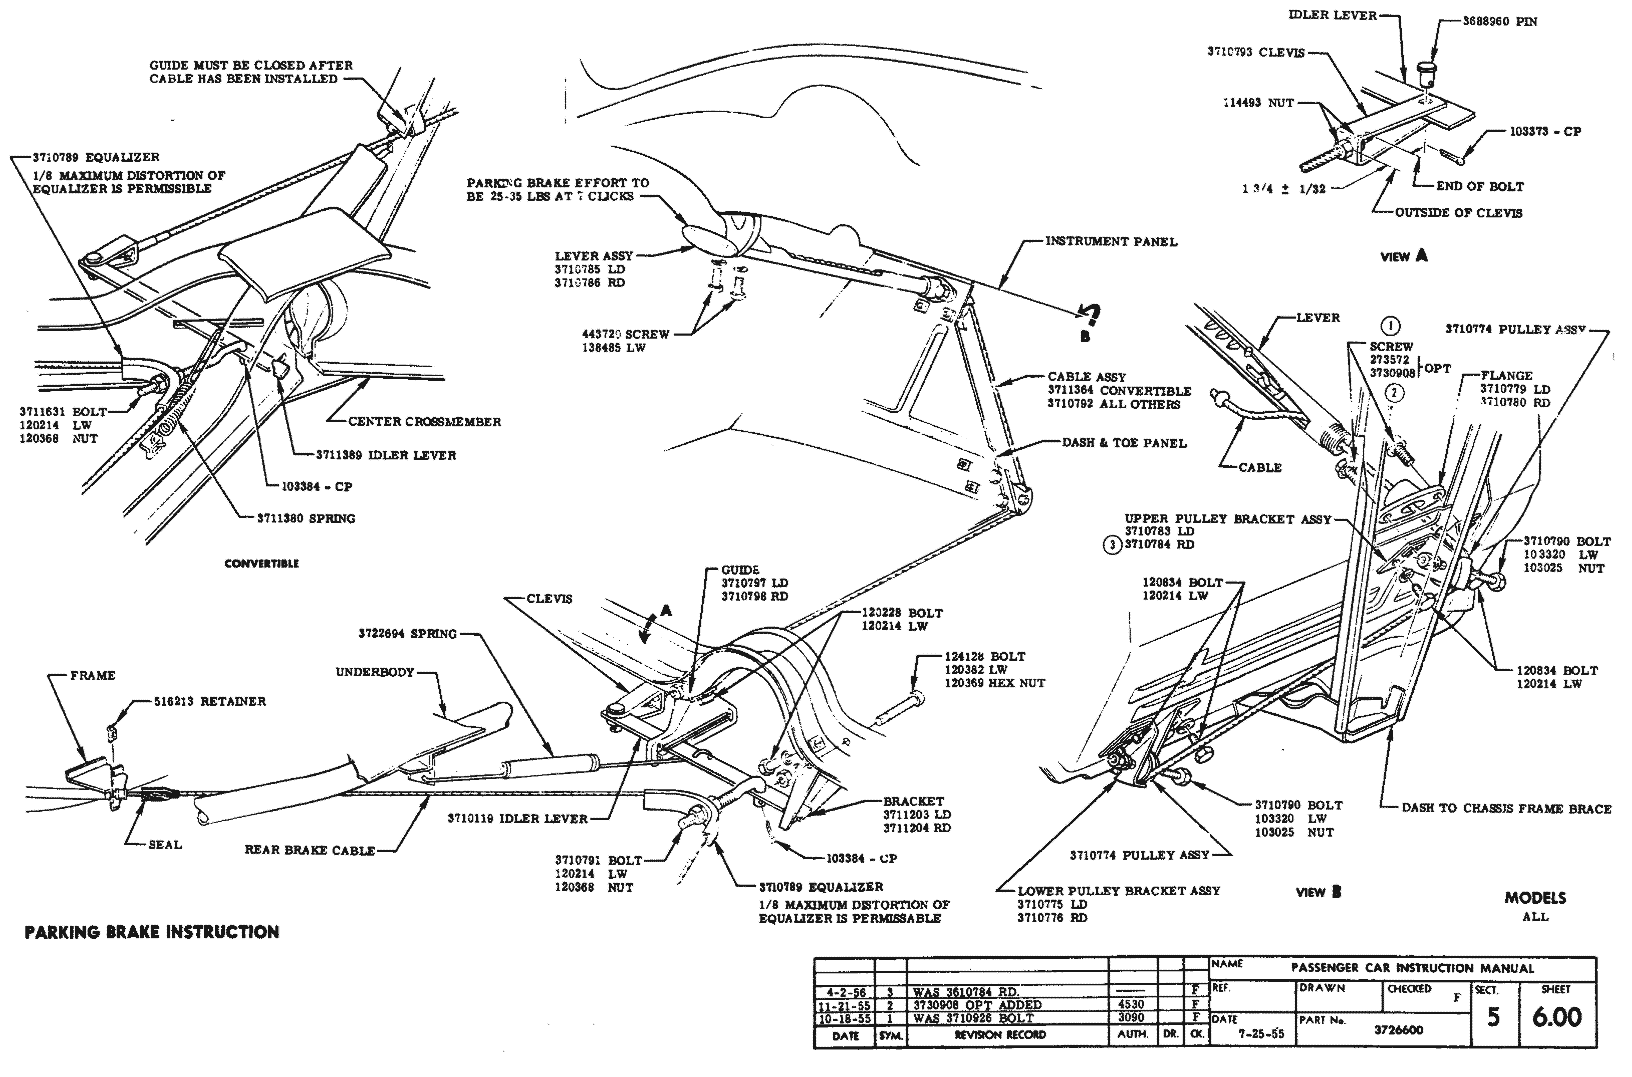 1956 Passenger Assembly Manual wiring diagram for 64 falcon steering column 